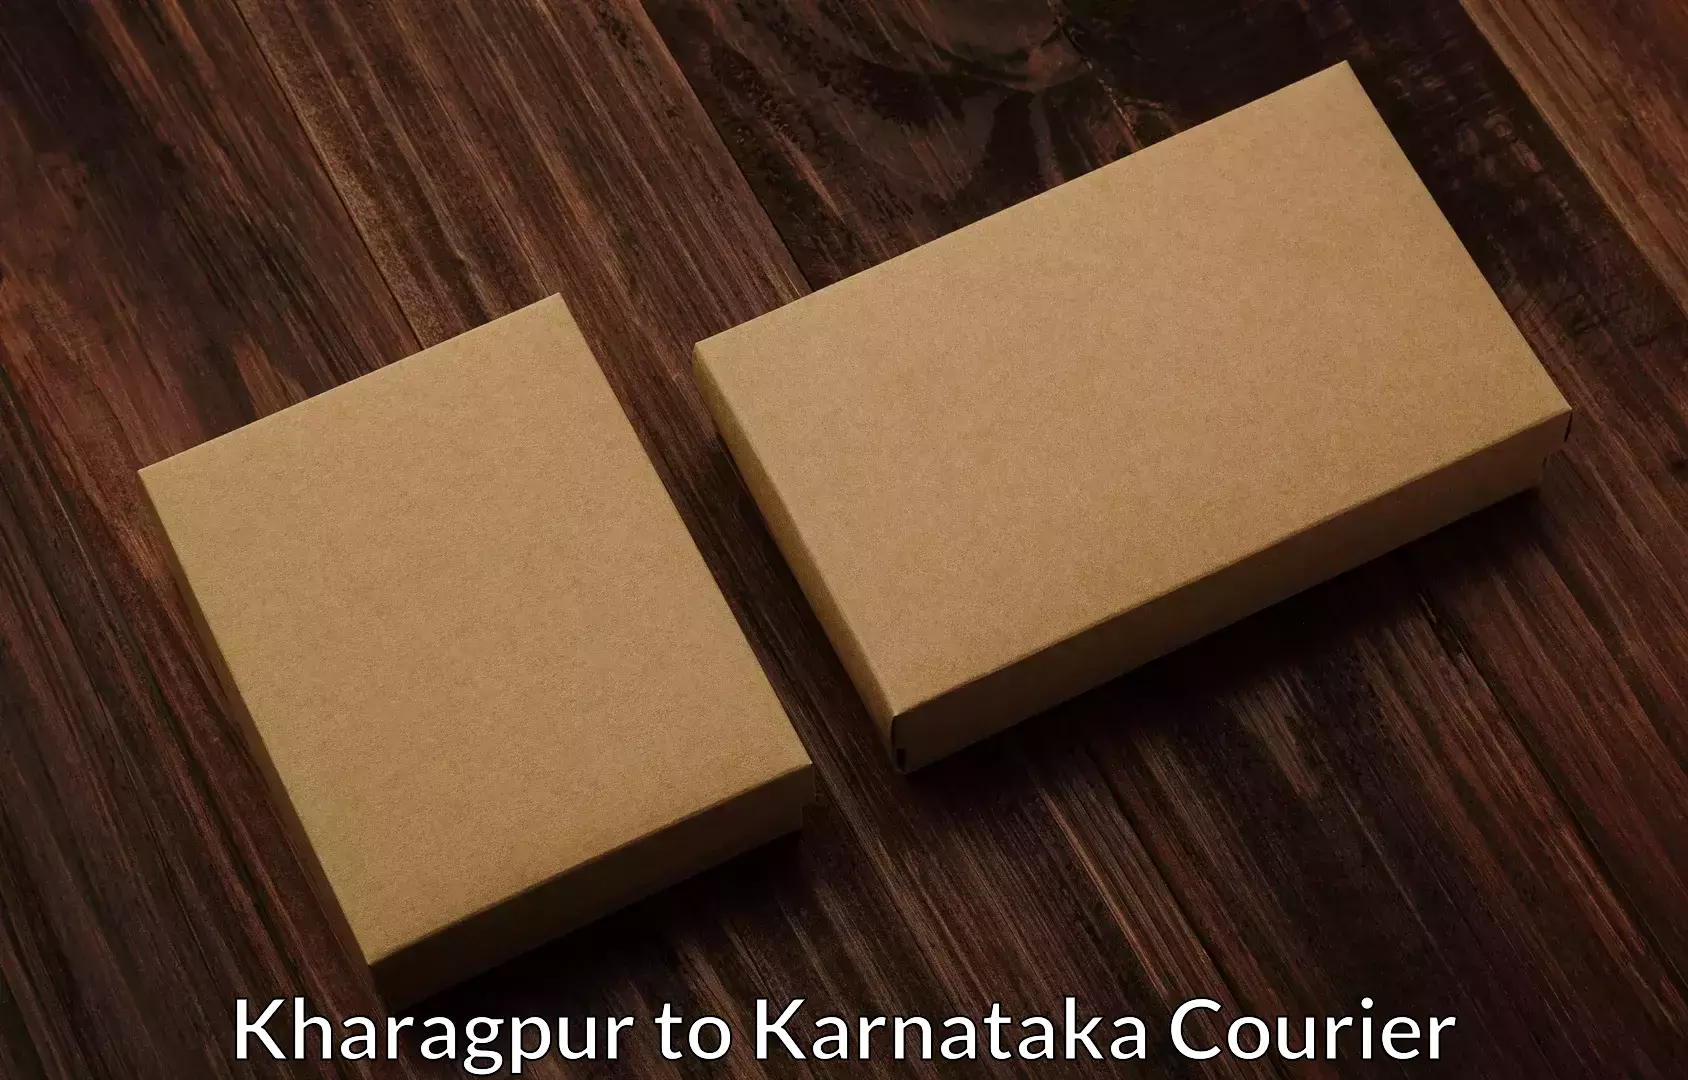 Hassle-free relocation in Kharagpur to Chikkaballapur